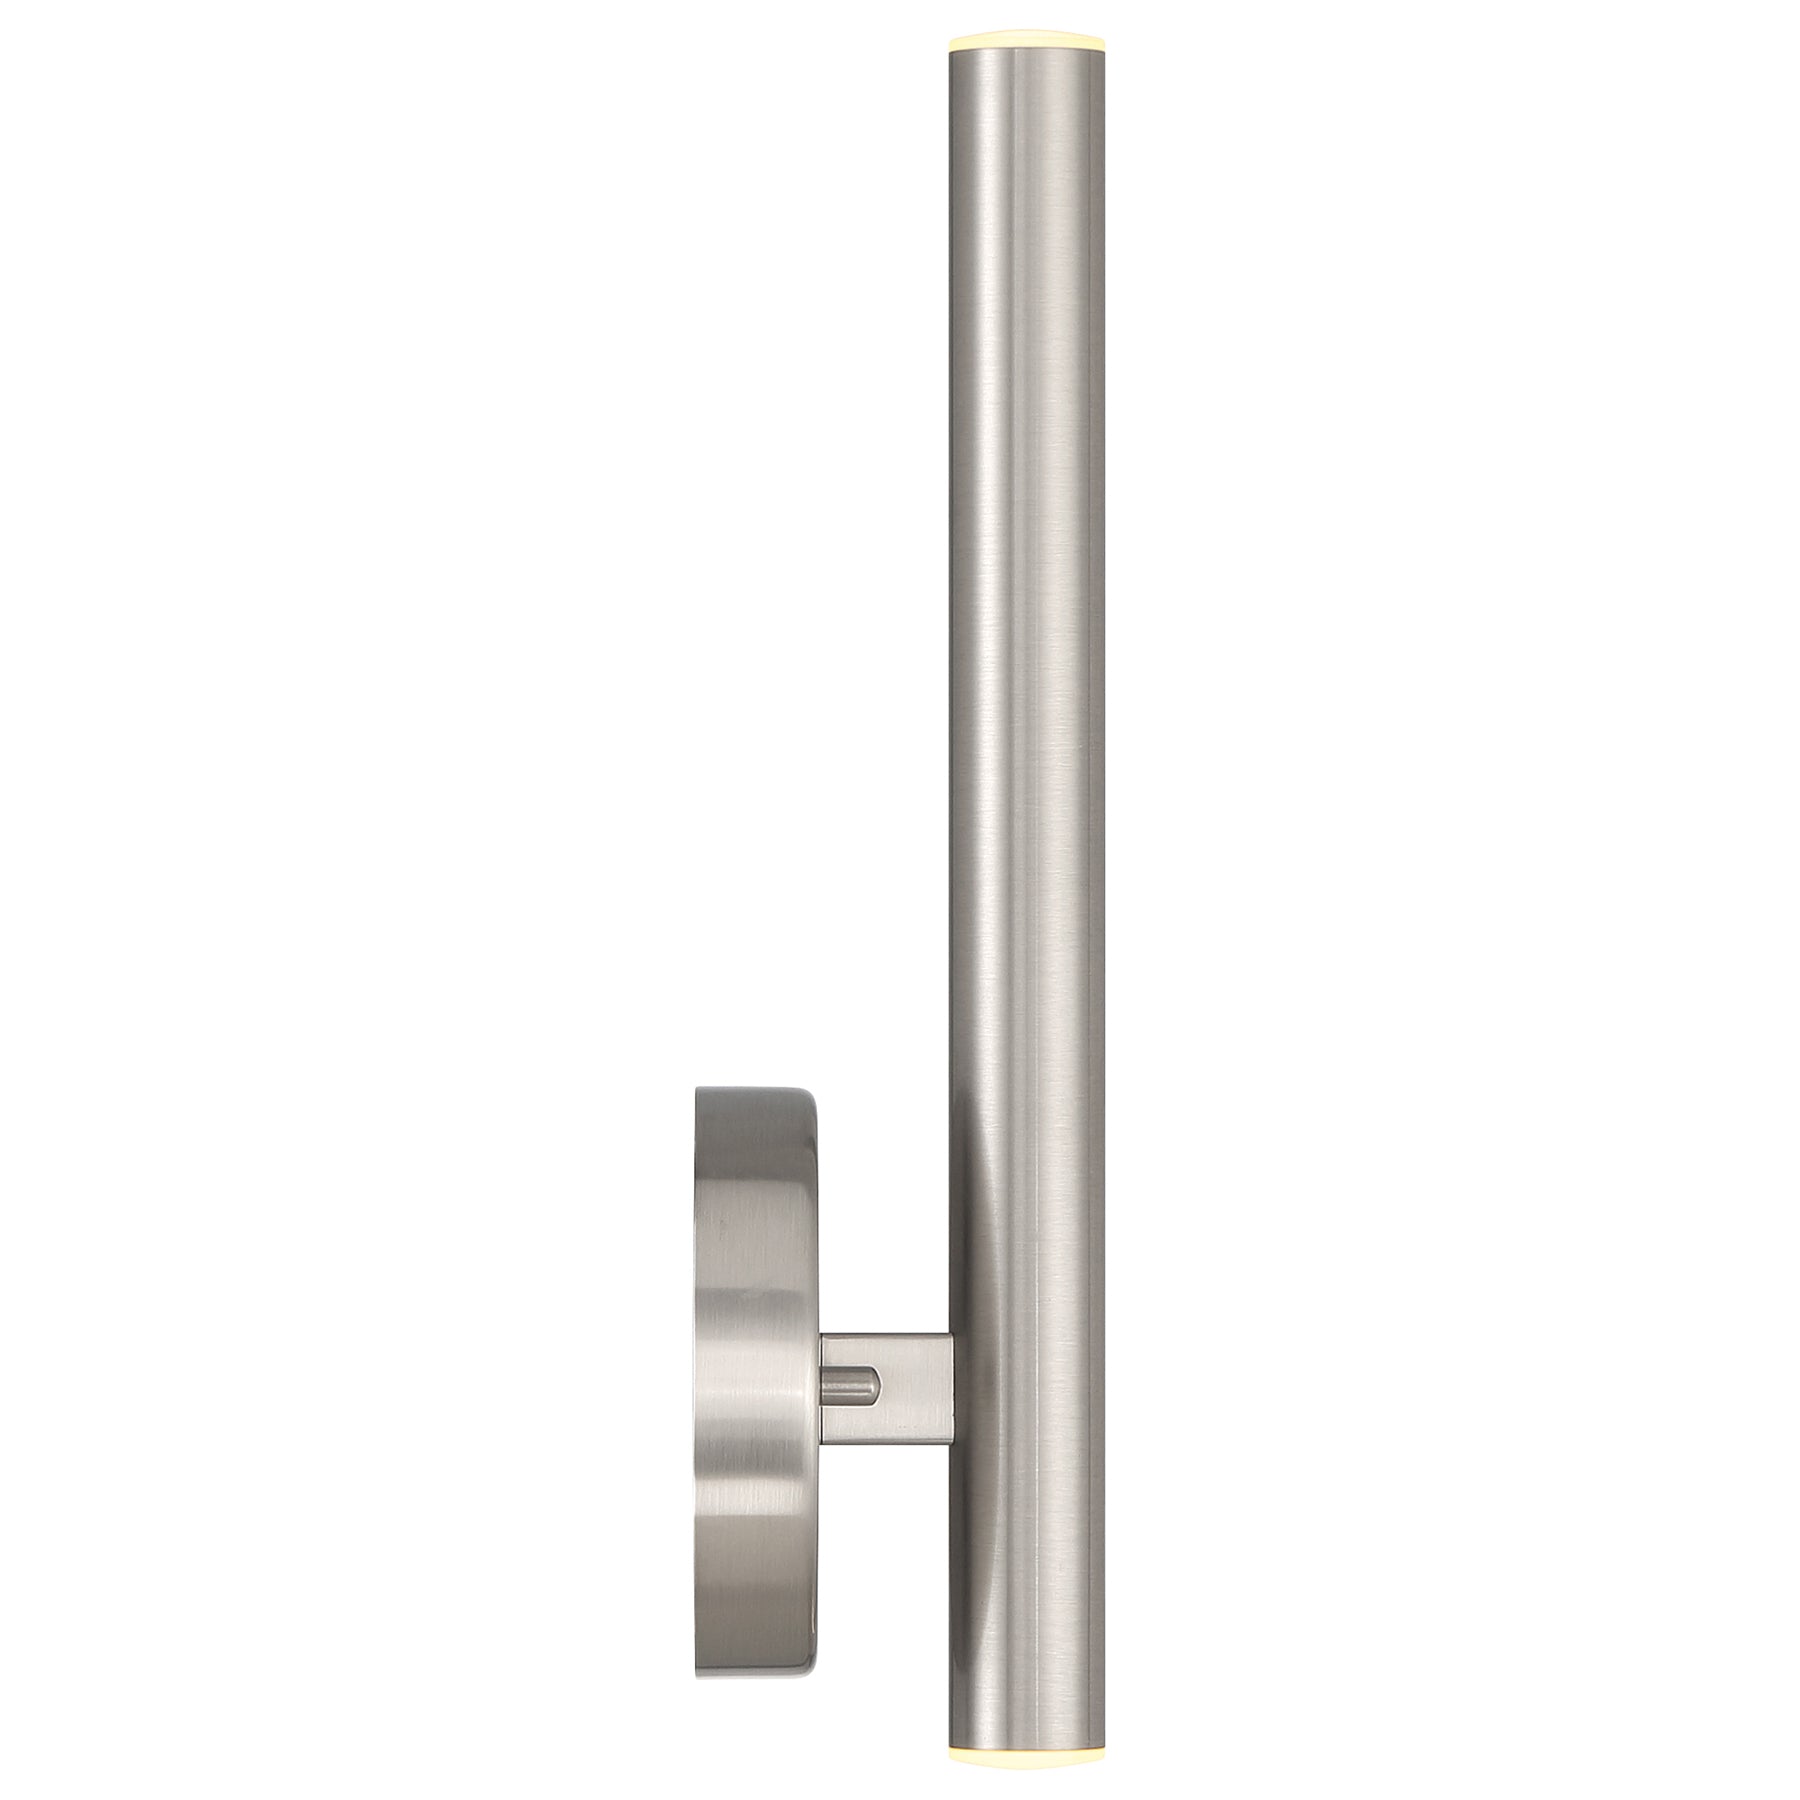 Pipeline 13.75in. LED Contemporary Wall Light Fixture (Brushed Steel)